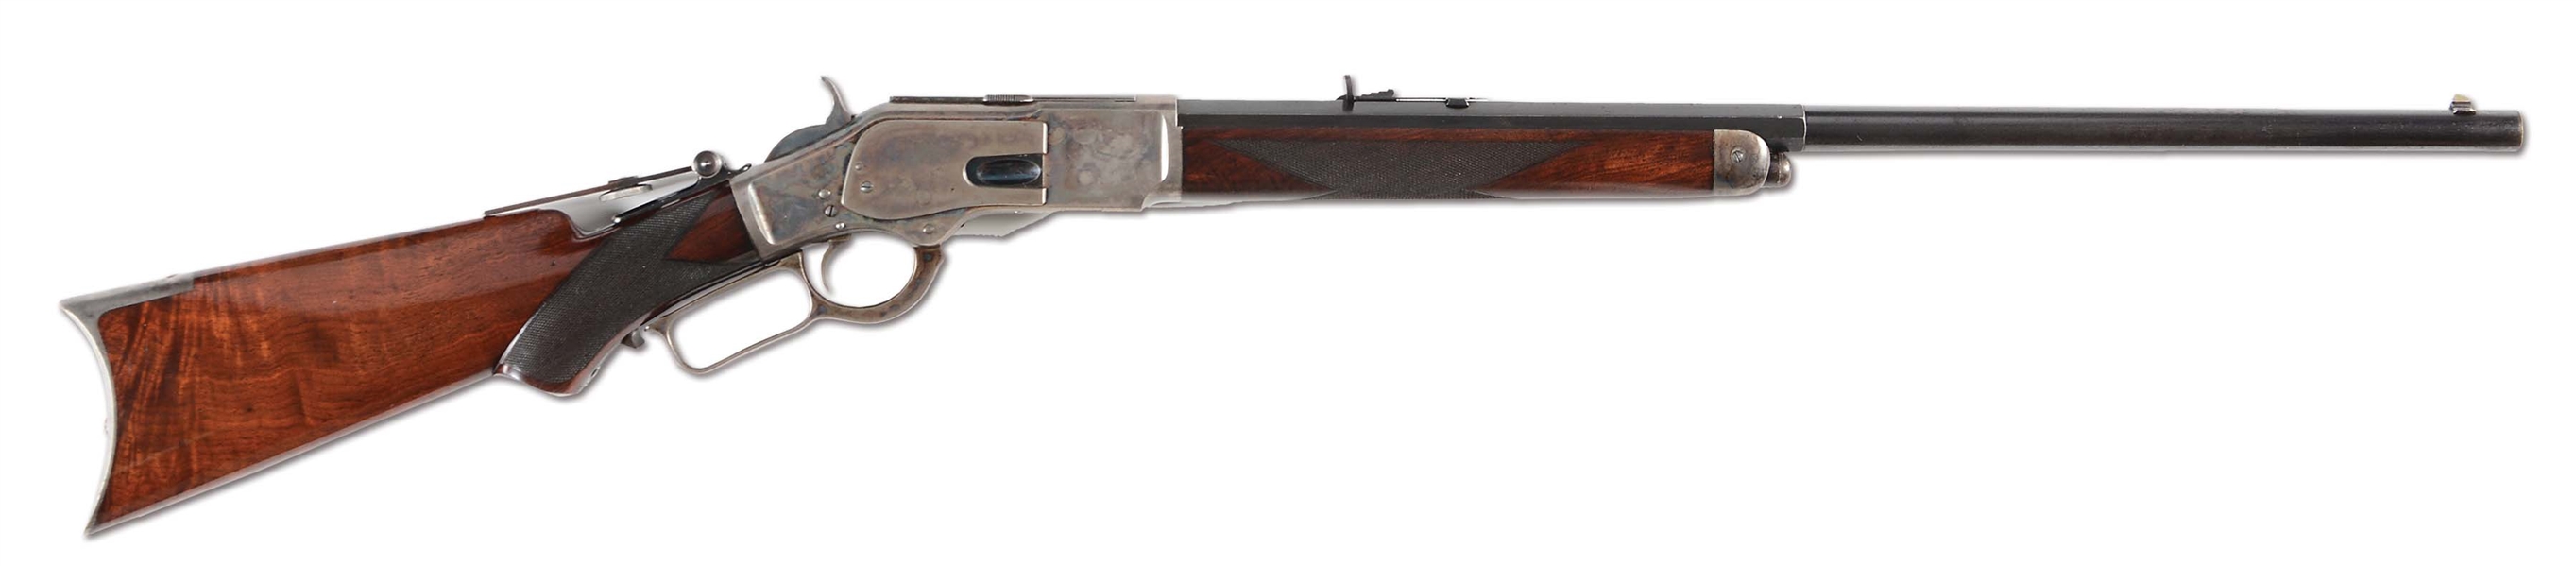 (C) WINCHESTER 1873 DELUXE LEVER ACTION RIFLE.